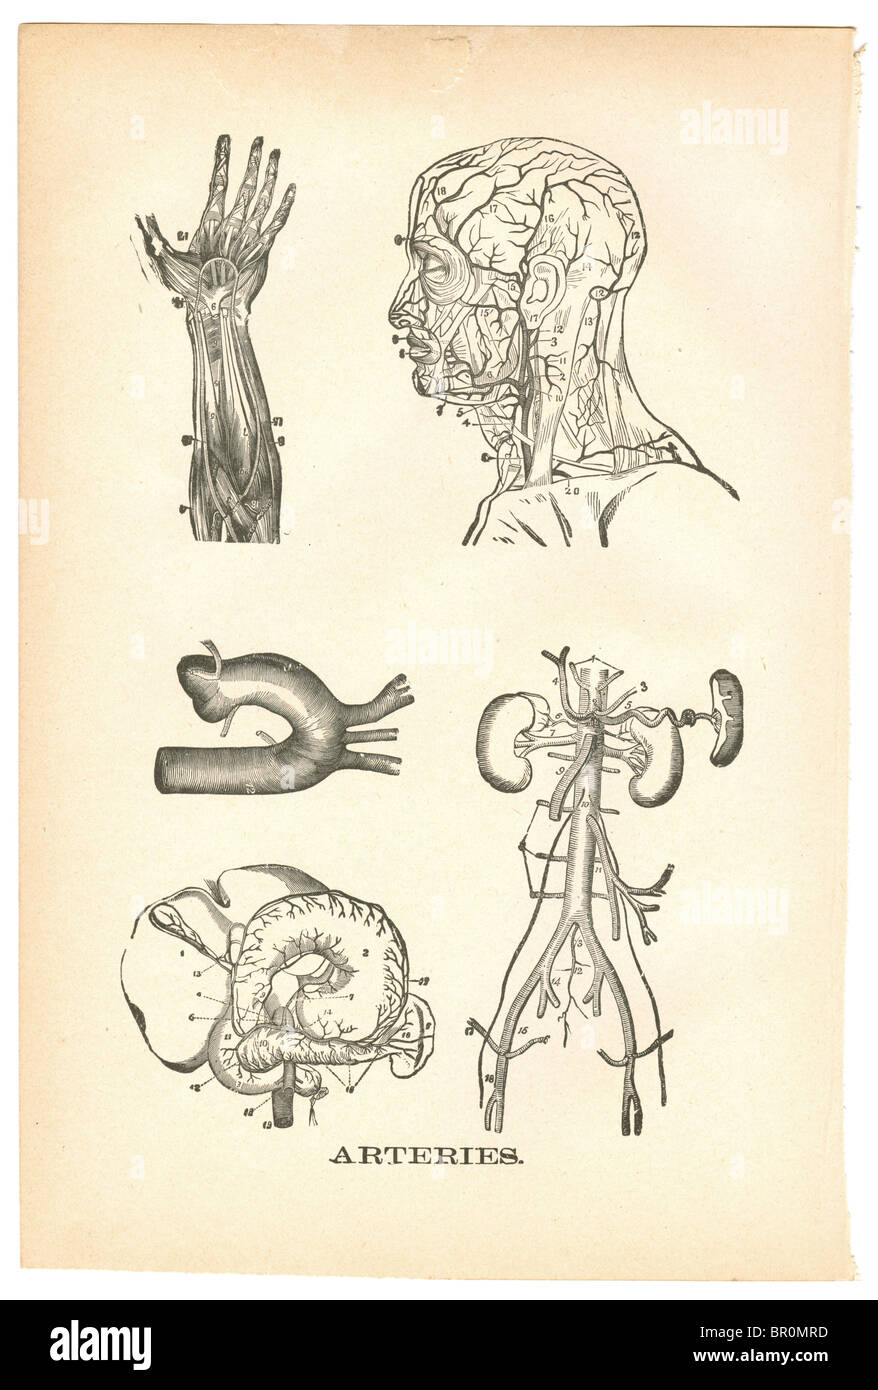 Illustrations of arteries from a vintage medical book Stock Photo